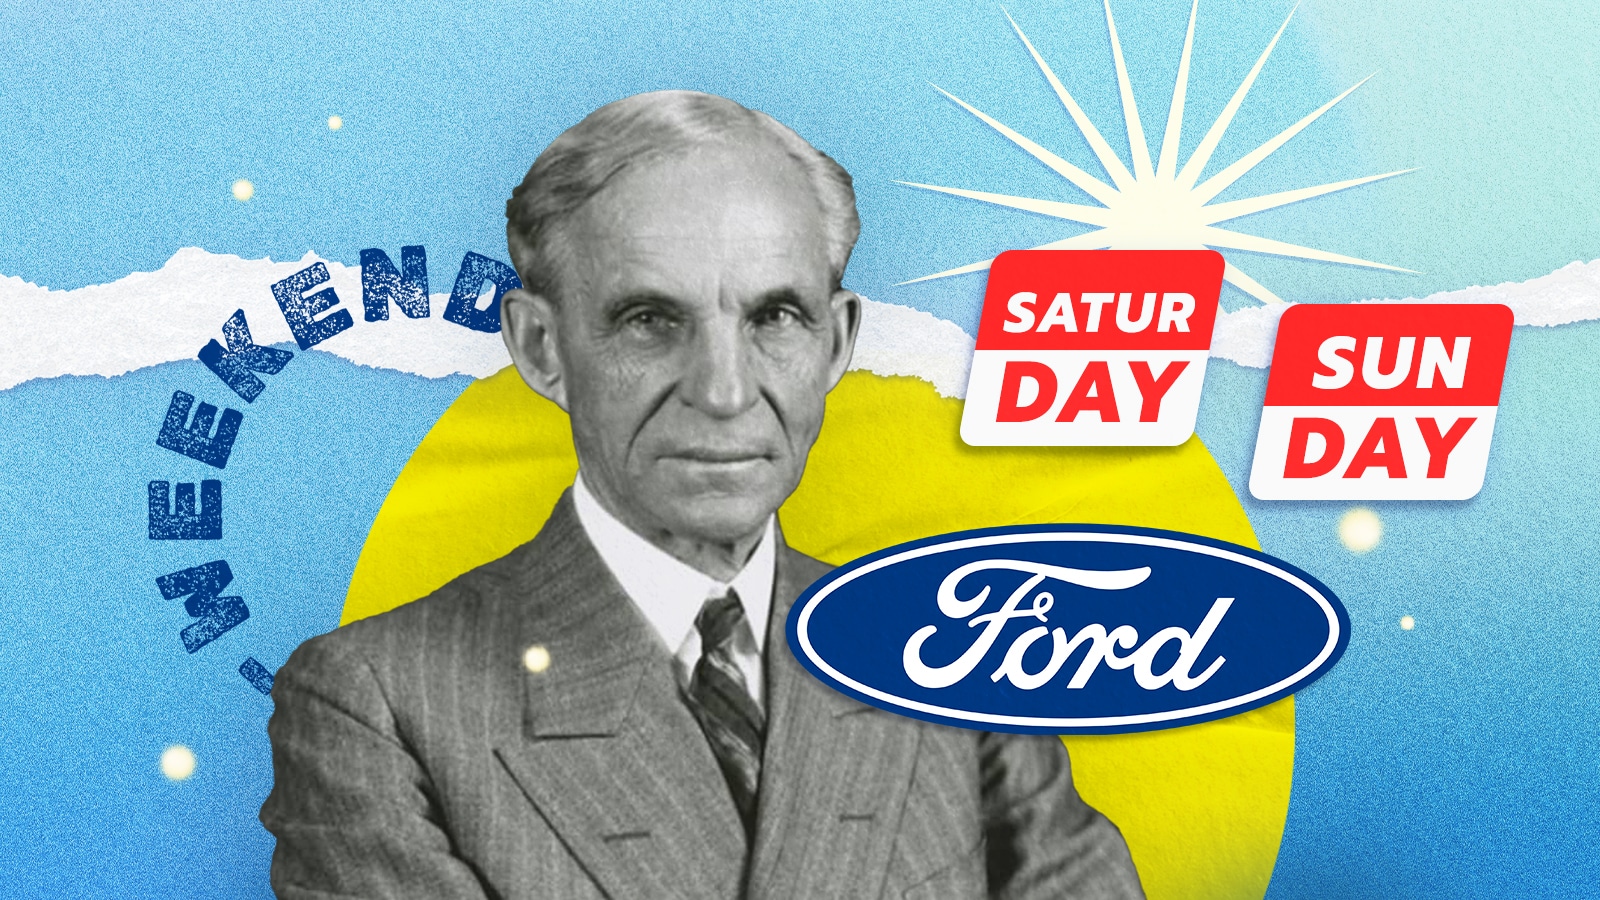 'Weekend' by Henry Ford